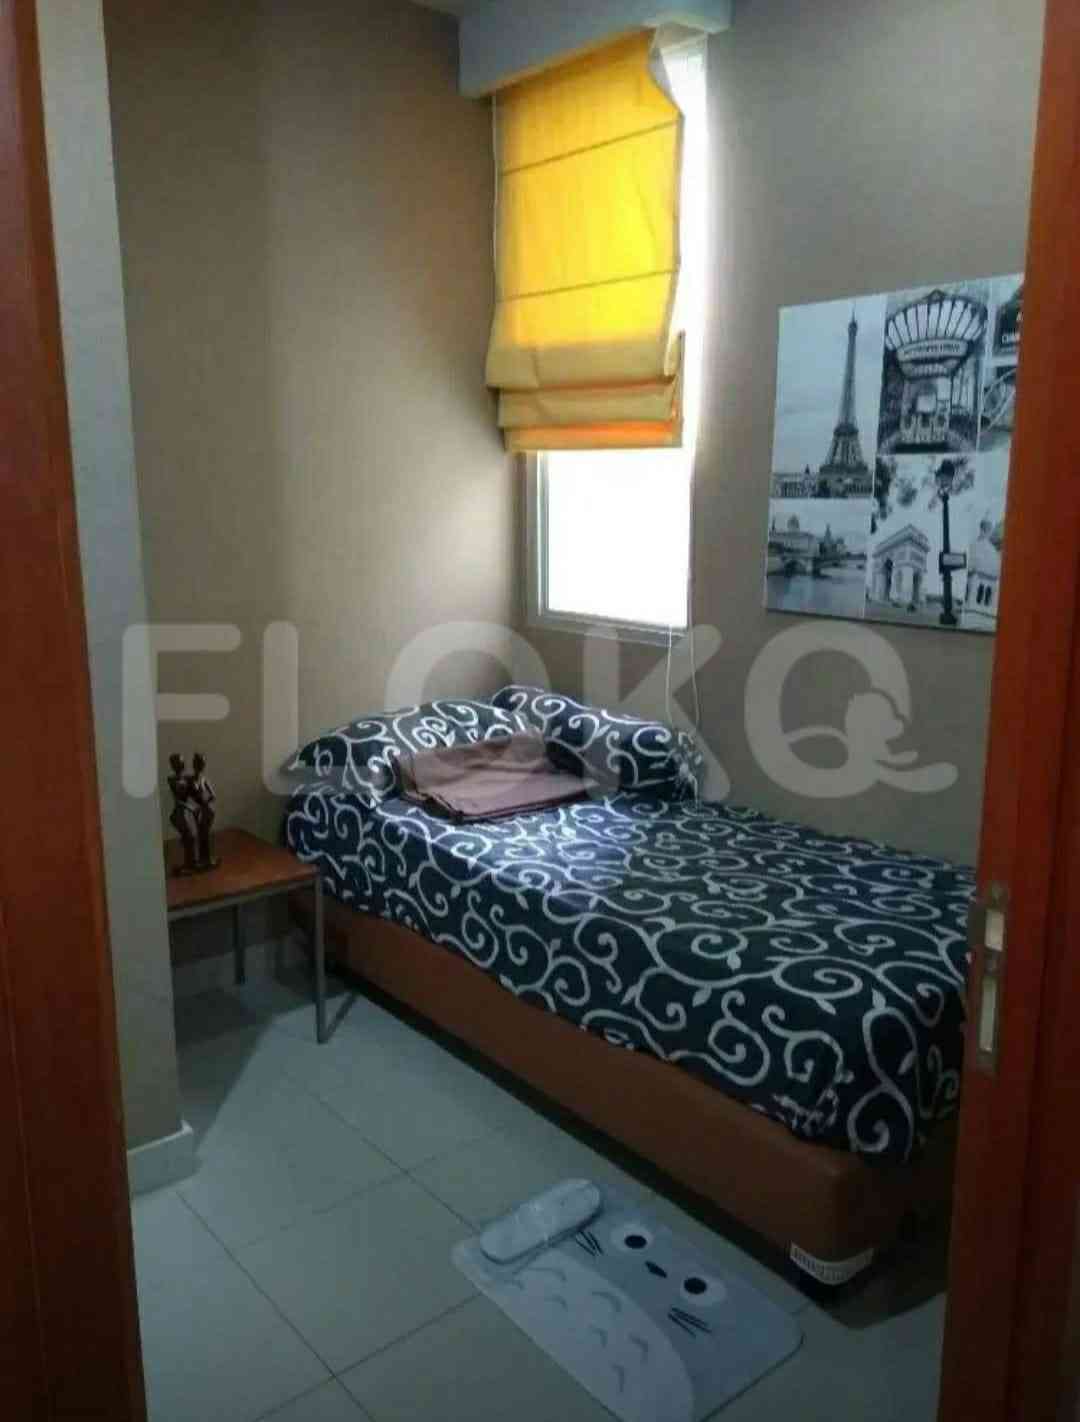 2 Bedroom on nullth Floor for Rent in Kuningan Place Apartment - fku453 7